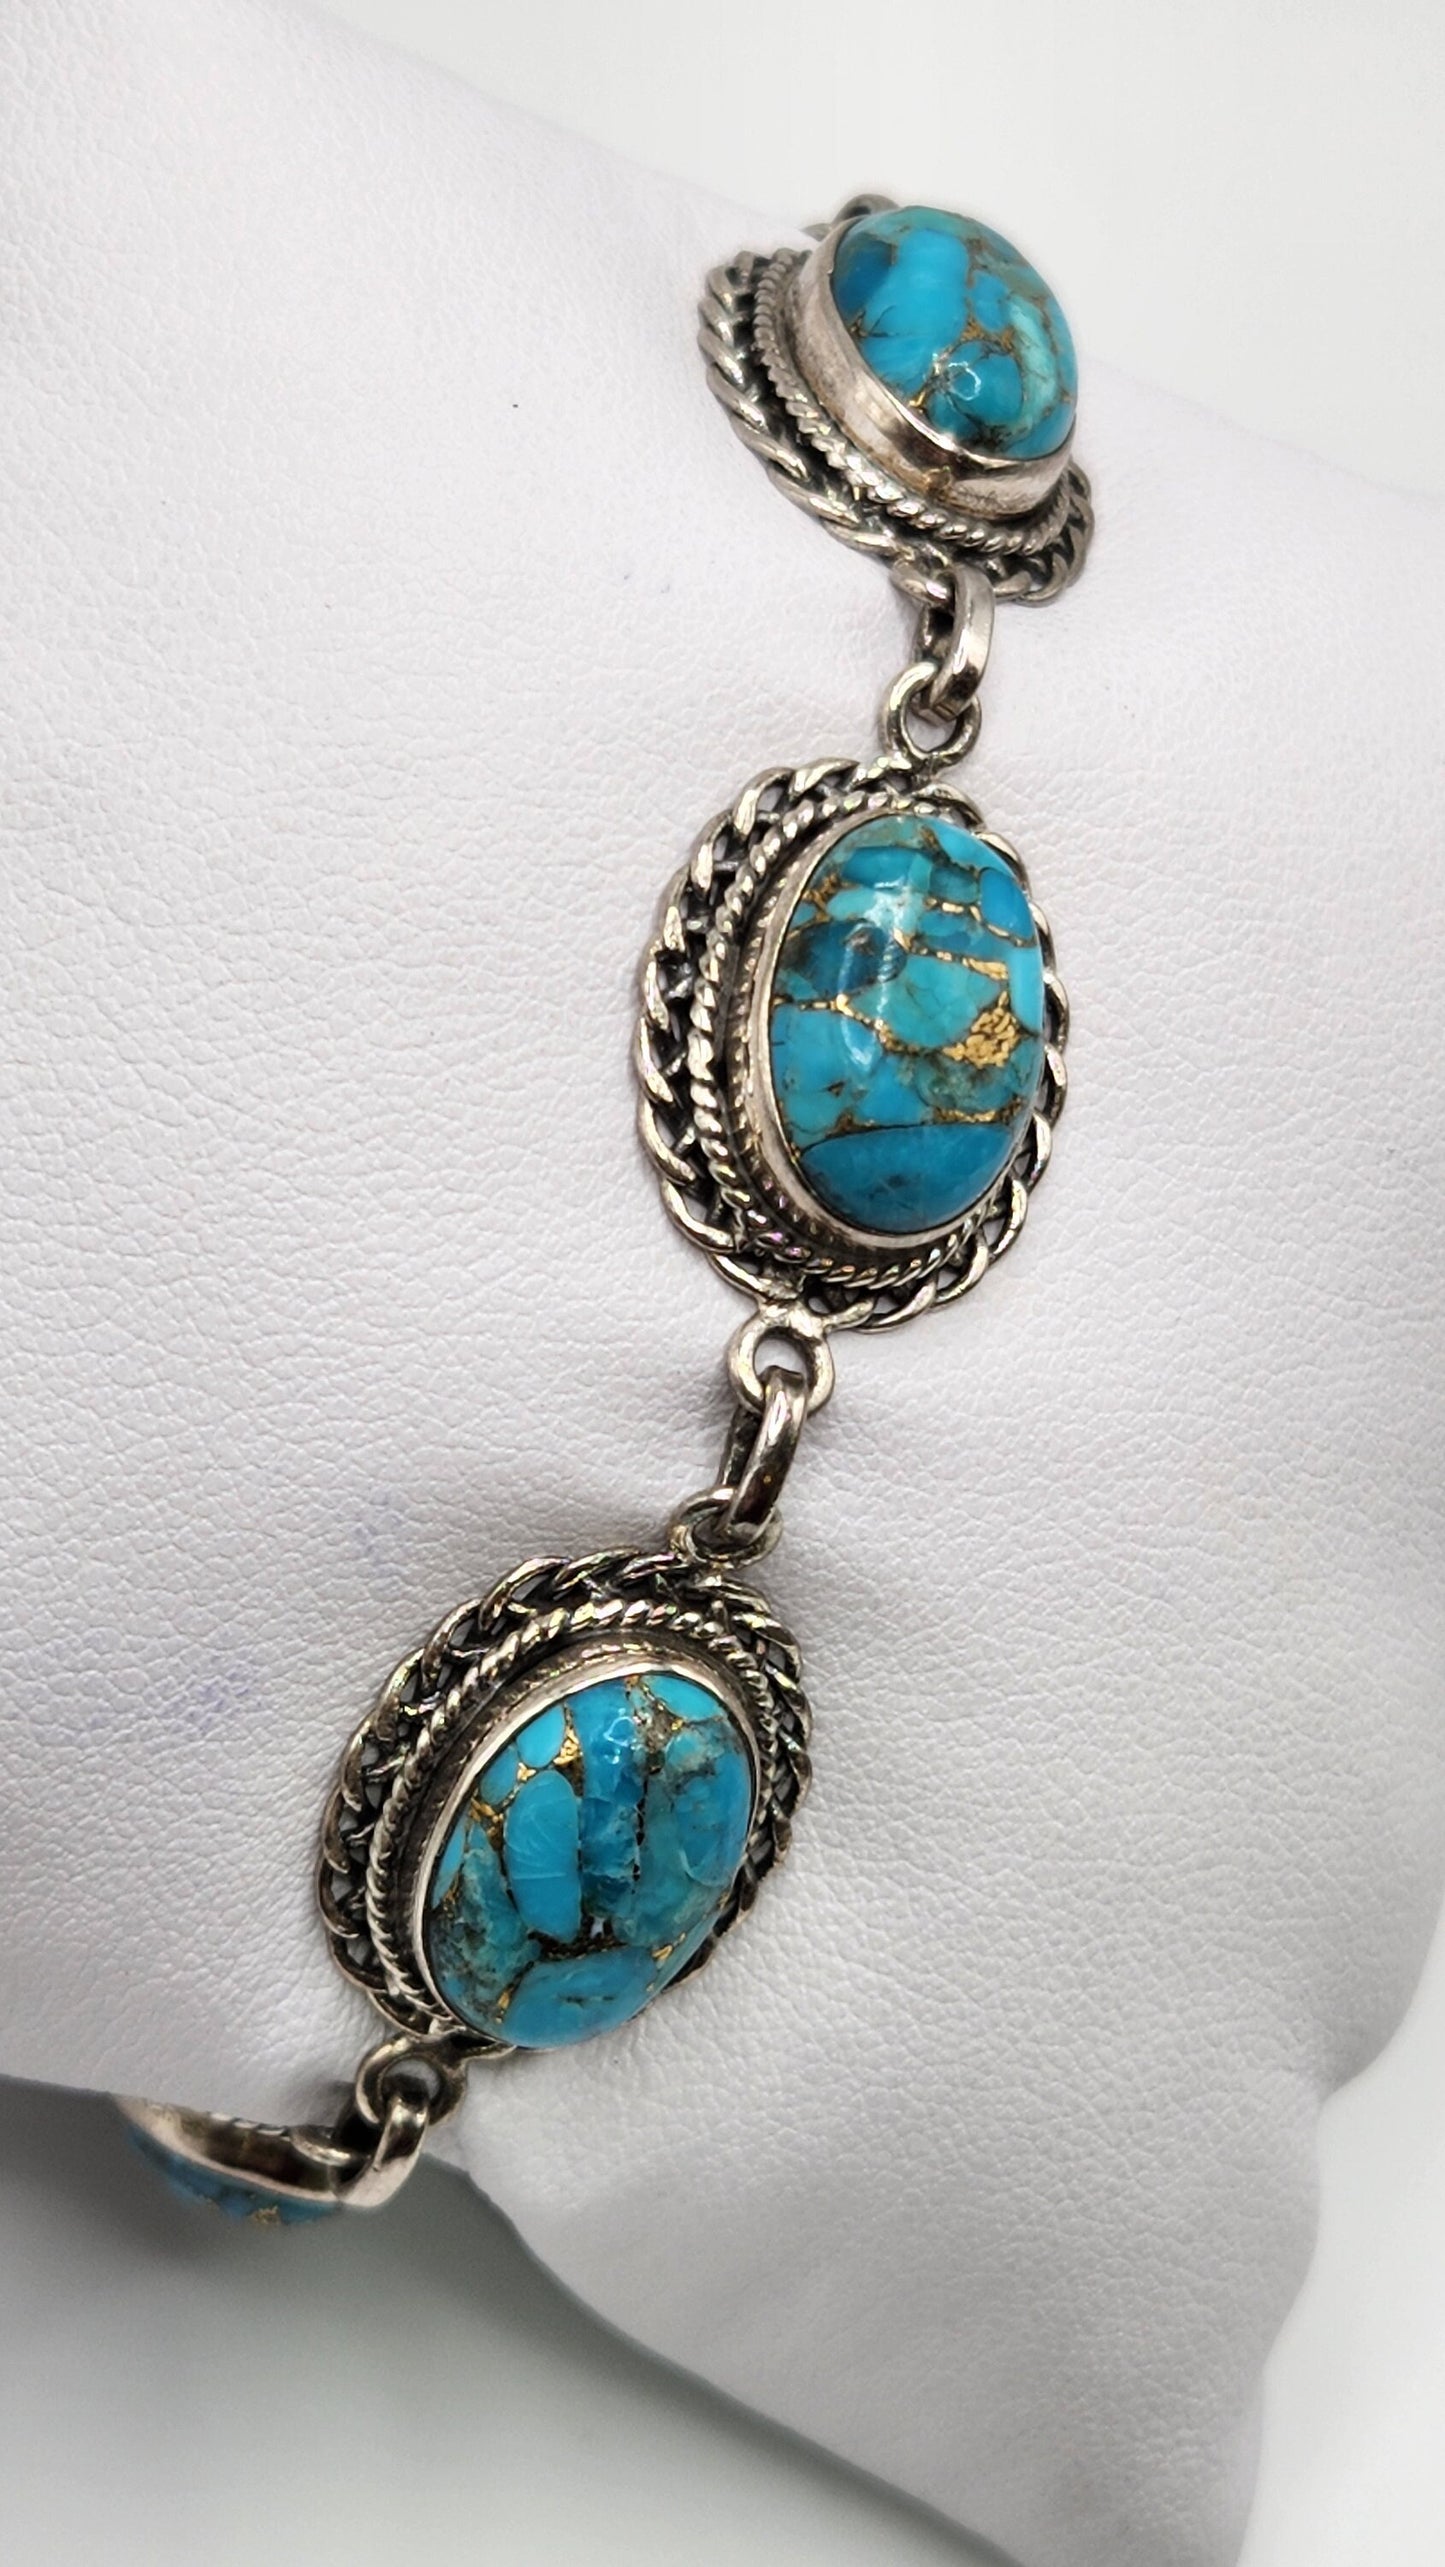 Genuine Turquoise and Silver Bracelet with Gold Inlay